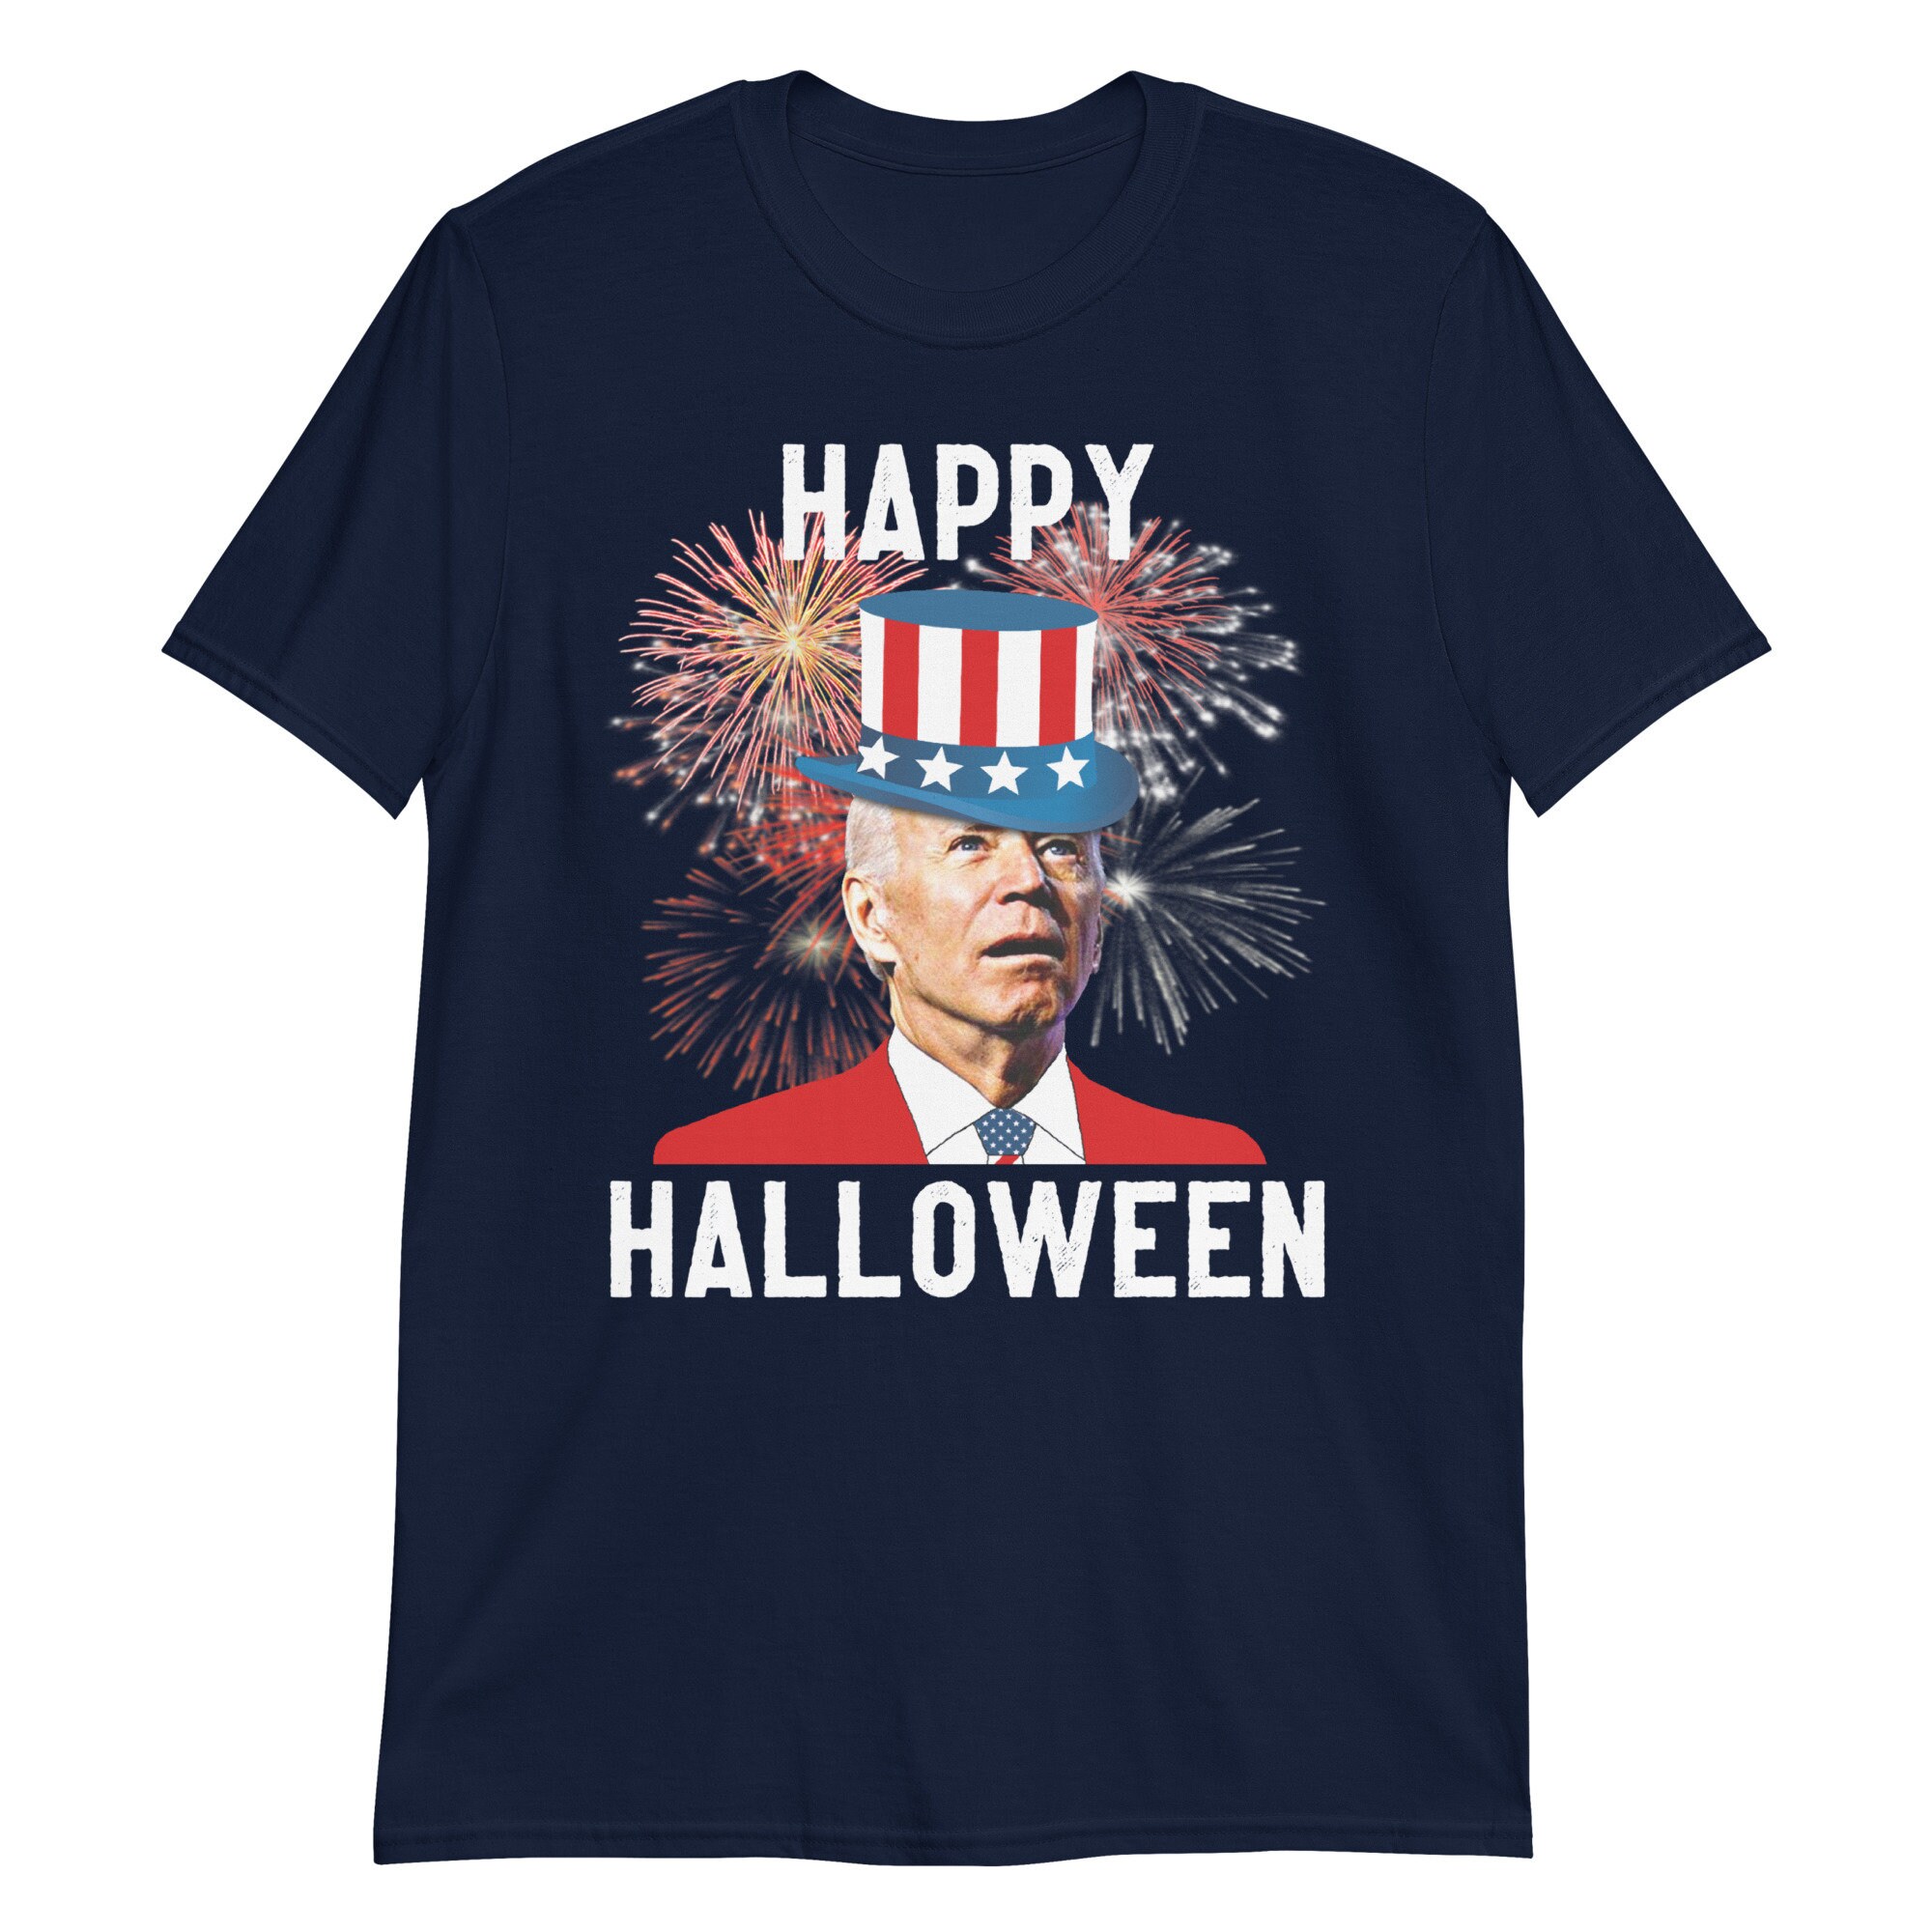 Discover Funny Biden Fourth Of July Shirt, Funny 4th Of July Shirt, Biden Halloween Shirt